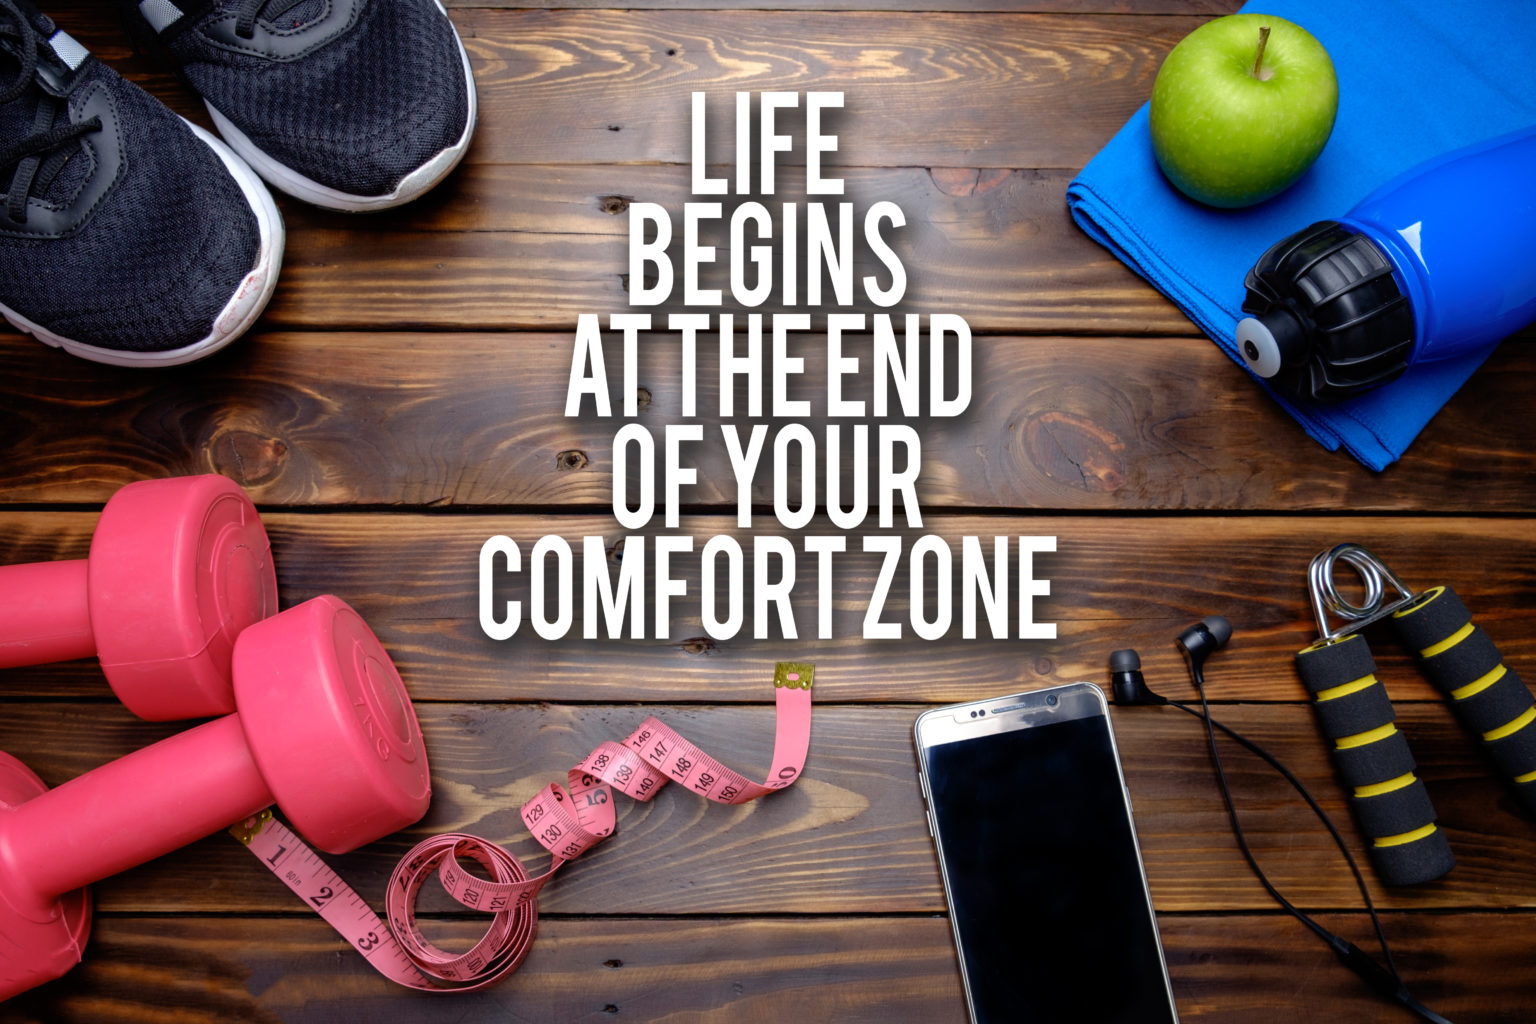 Life is a drink. Comfort Zone товары. Life begins at the end of your Comfort Zone. Stuck Comfort Zone. Out of your Comfort Zone.